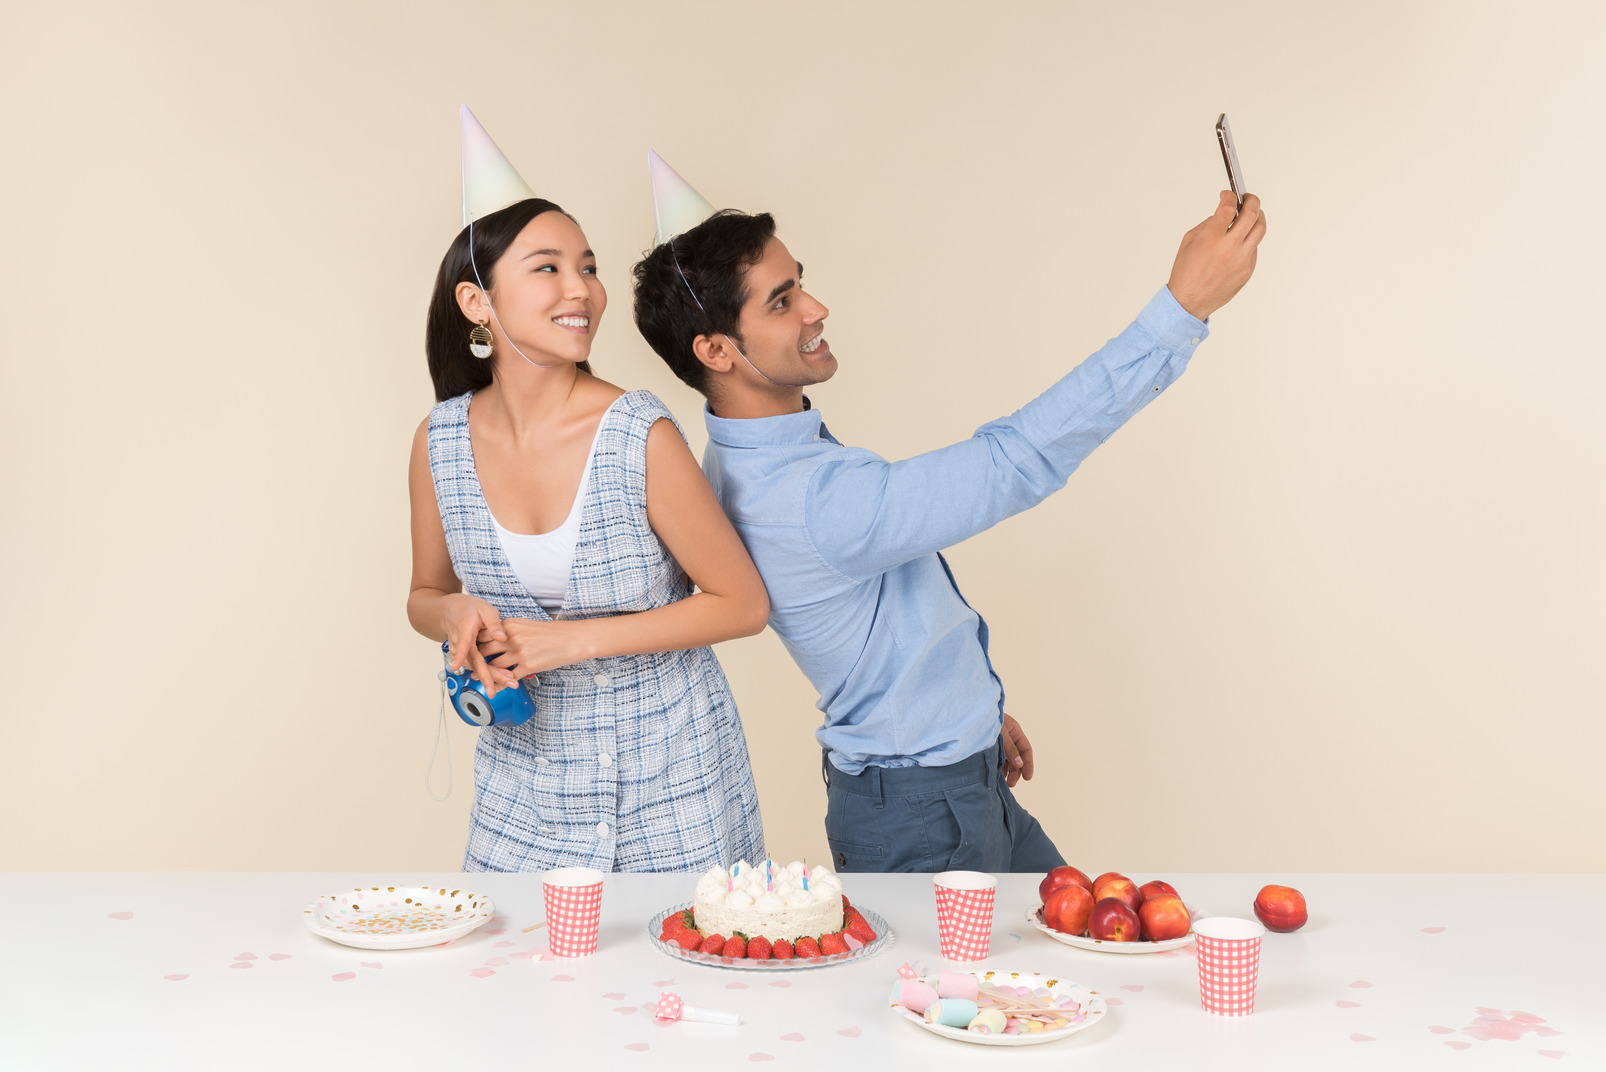 Young interracial couple making a selfie while celebrating birthday